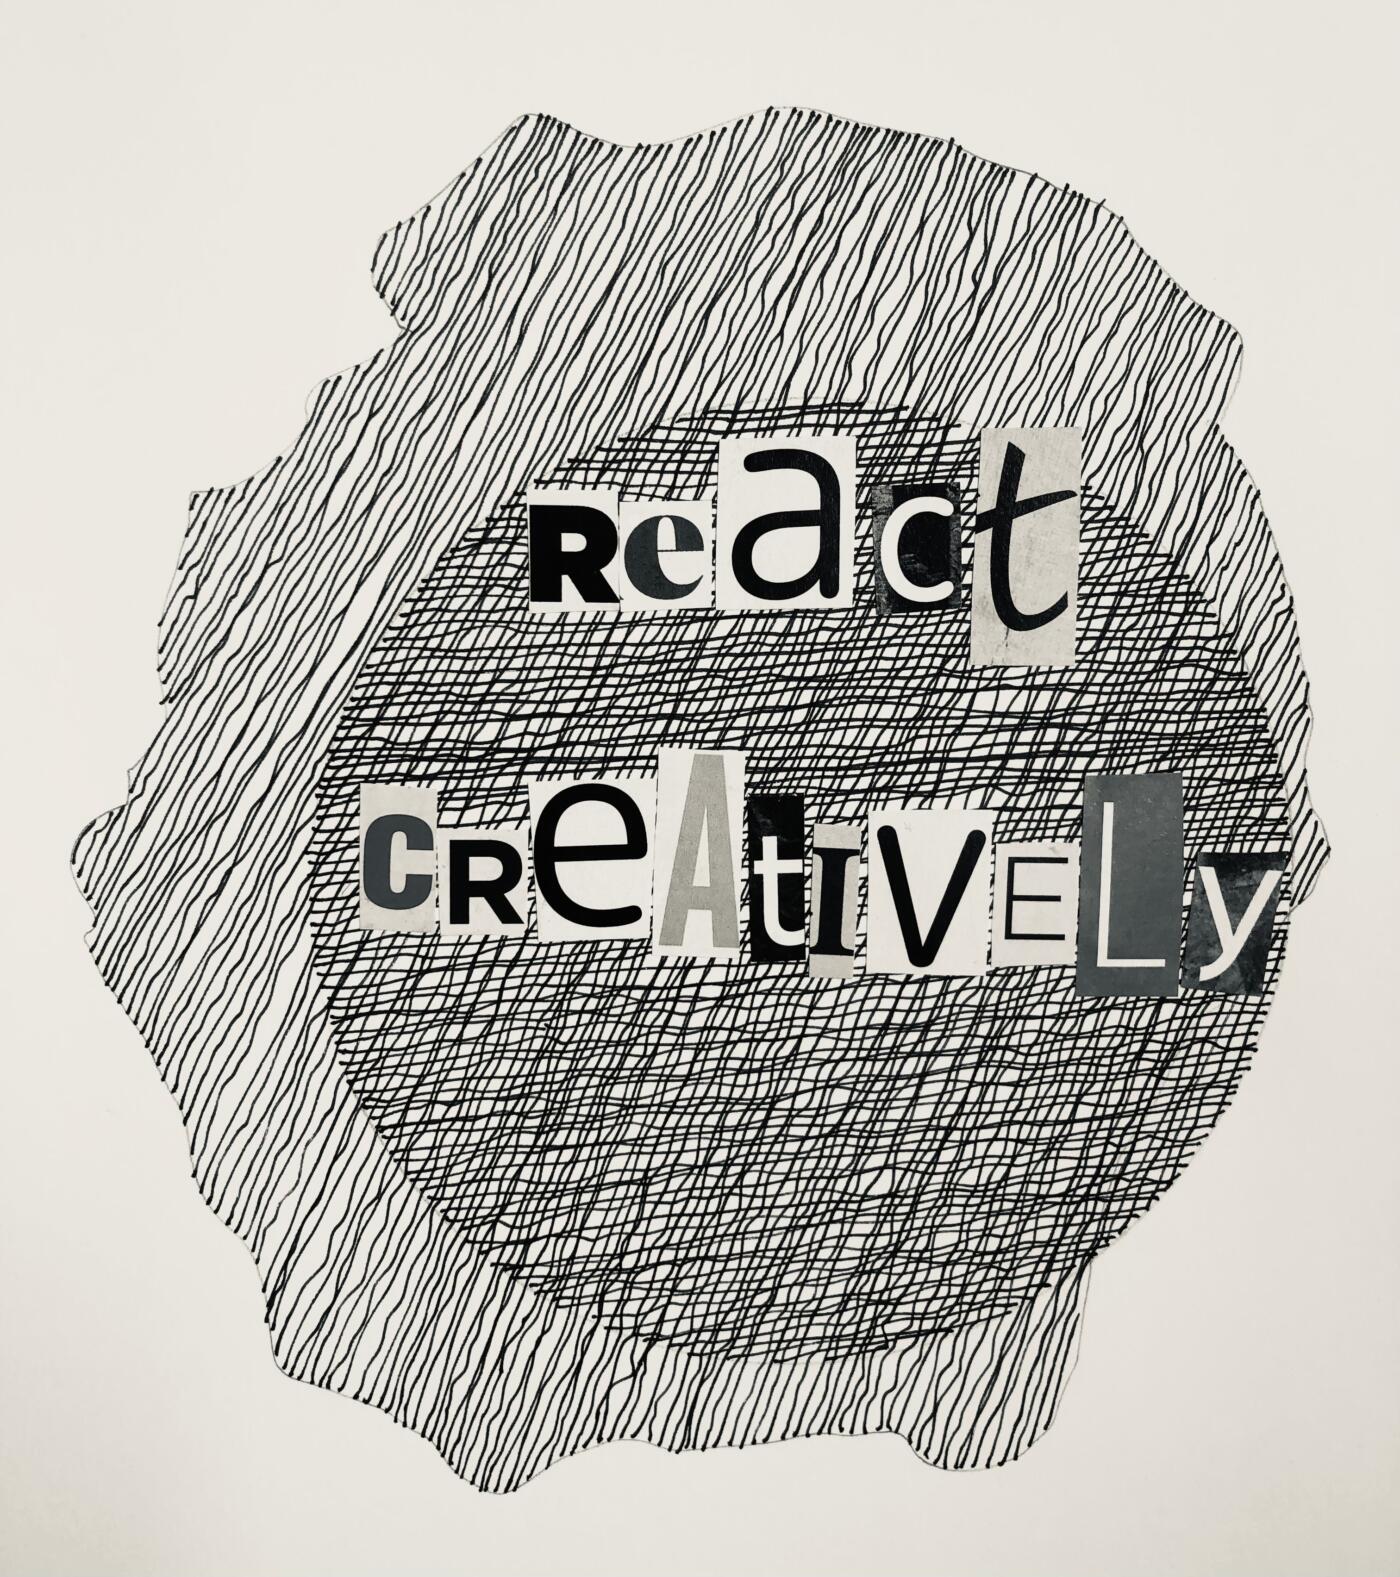 An abstract drawing of circles and lines, with letters cut in various styles collaged over that reads "React Creatively"